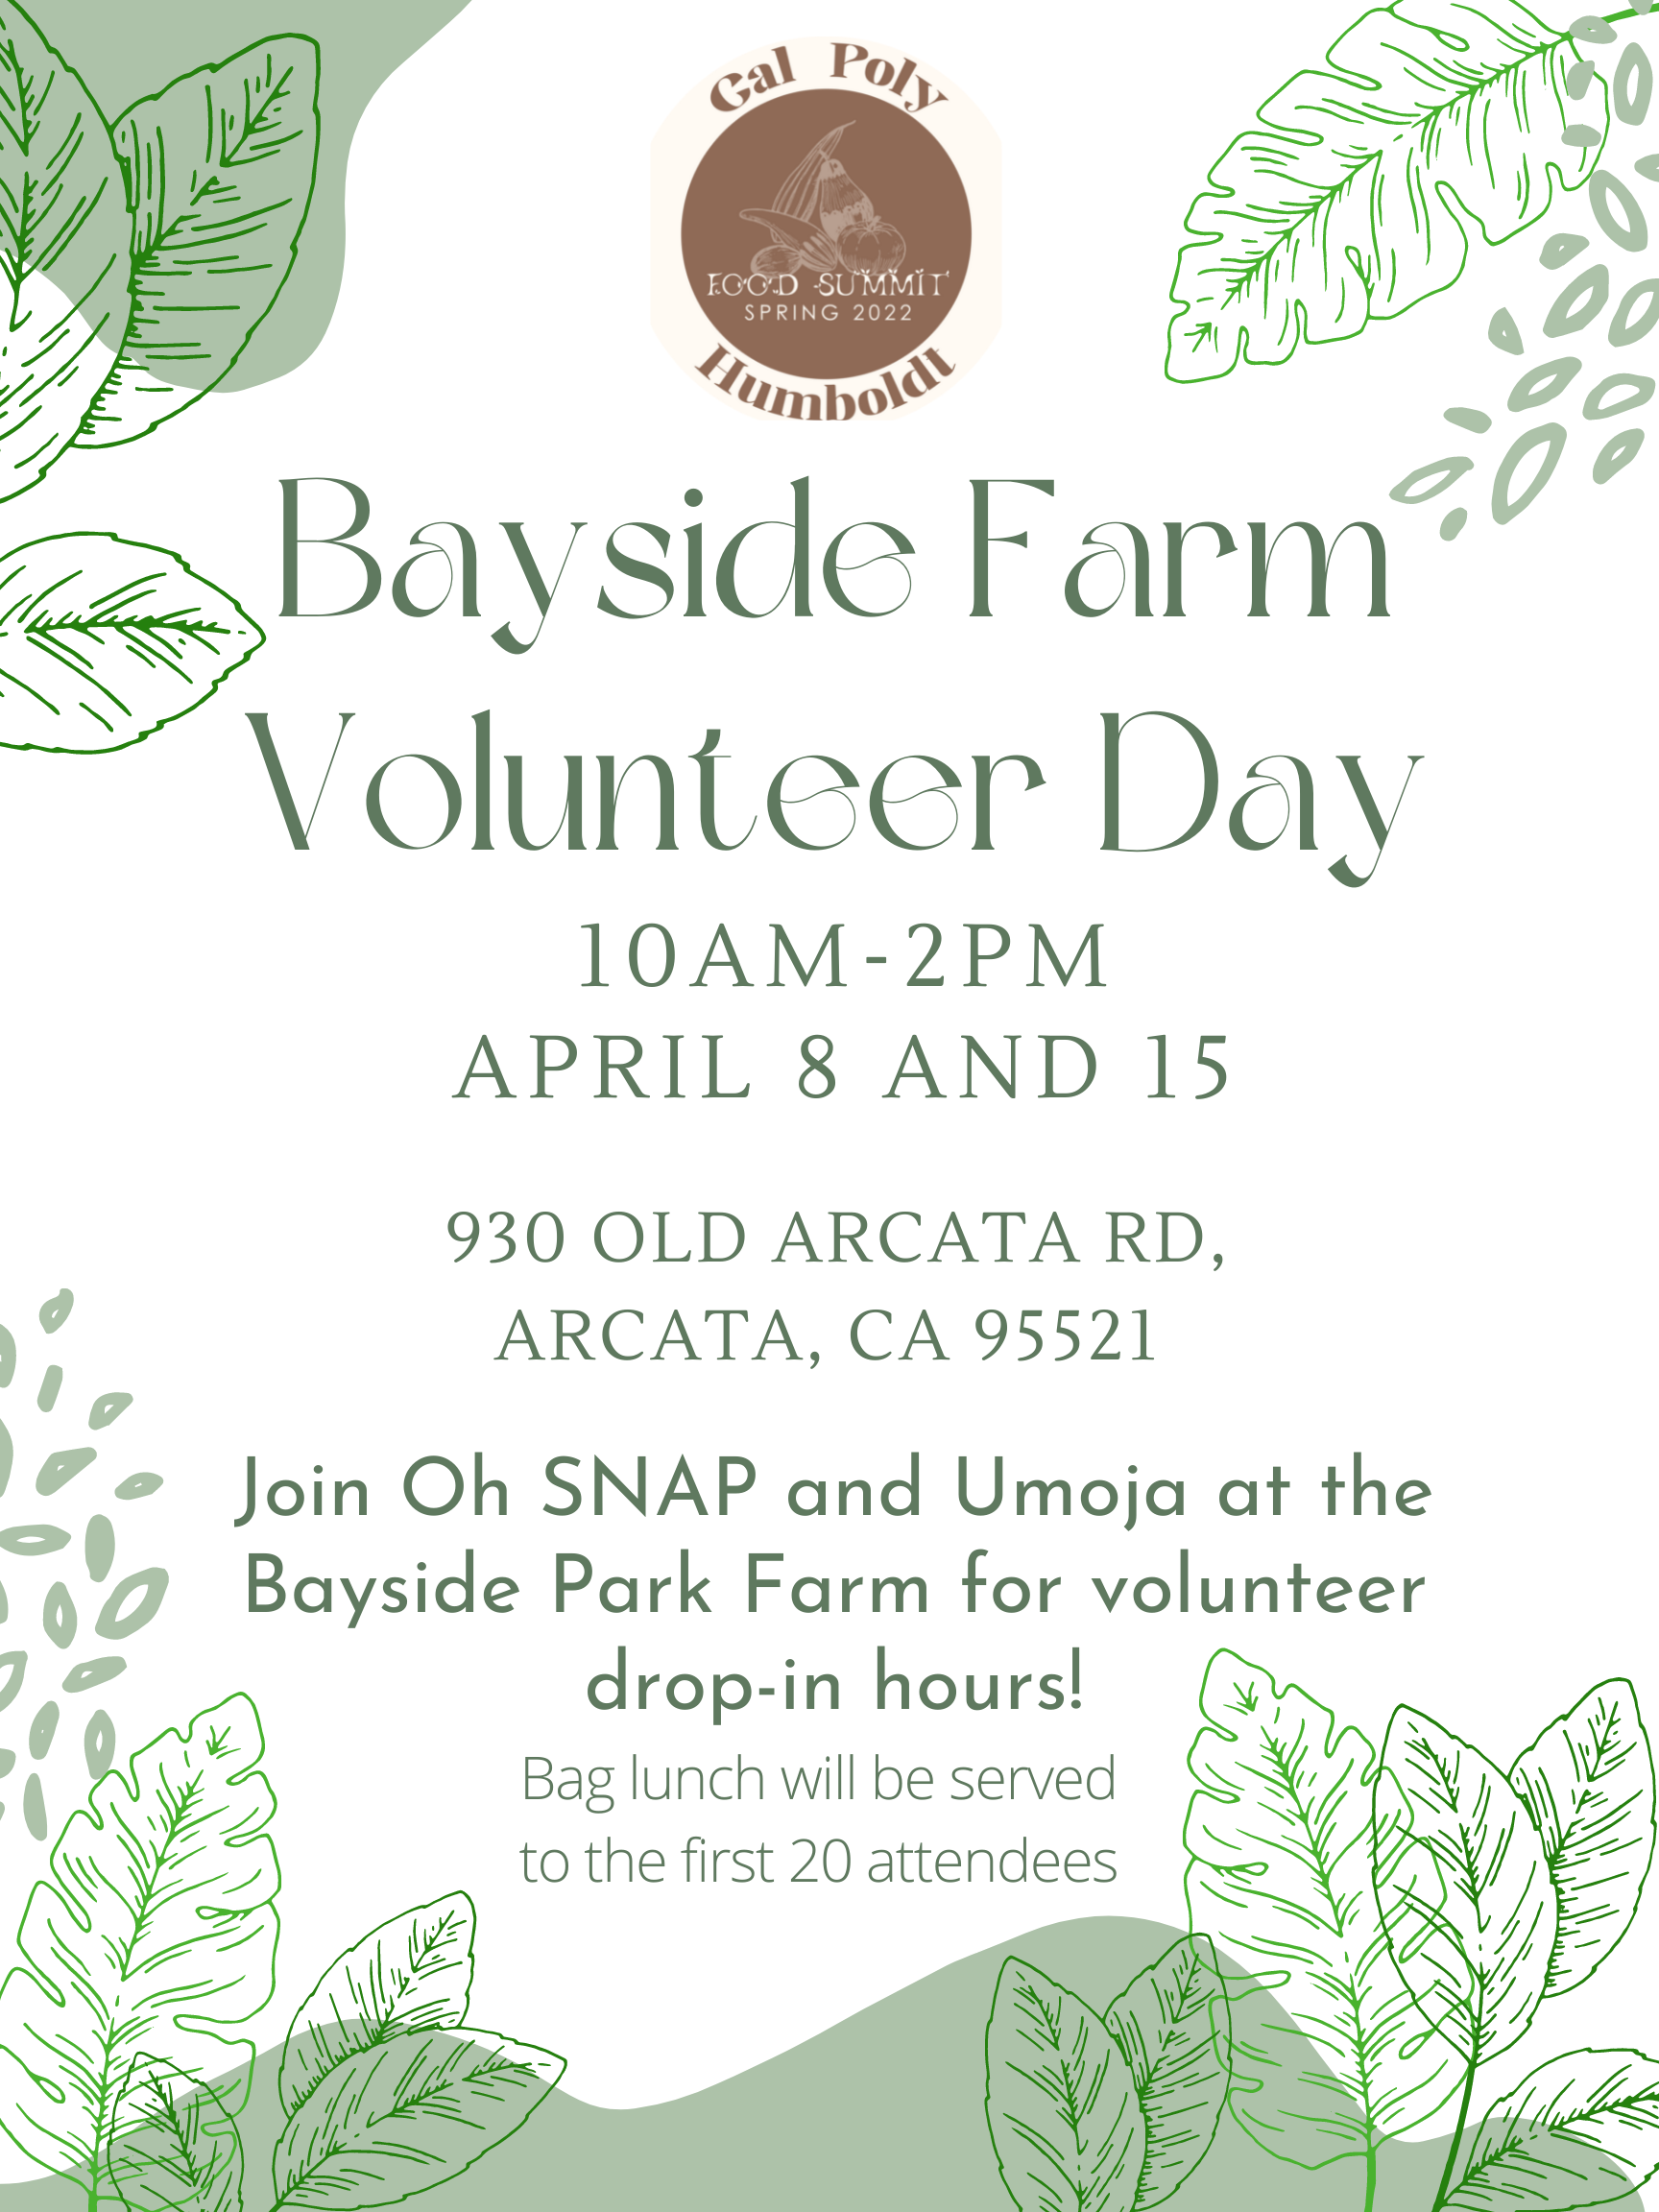 Bayside Farm Volunteer Days April 8 and 15 10am- 2pm 930 Old Arcata Road